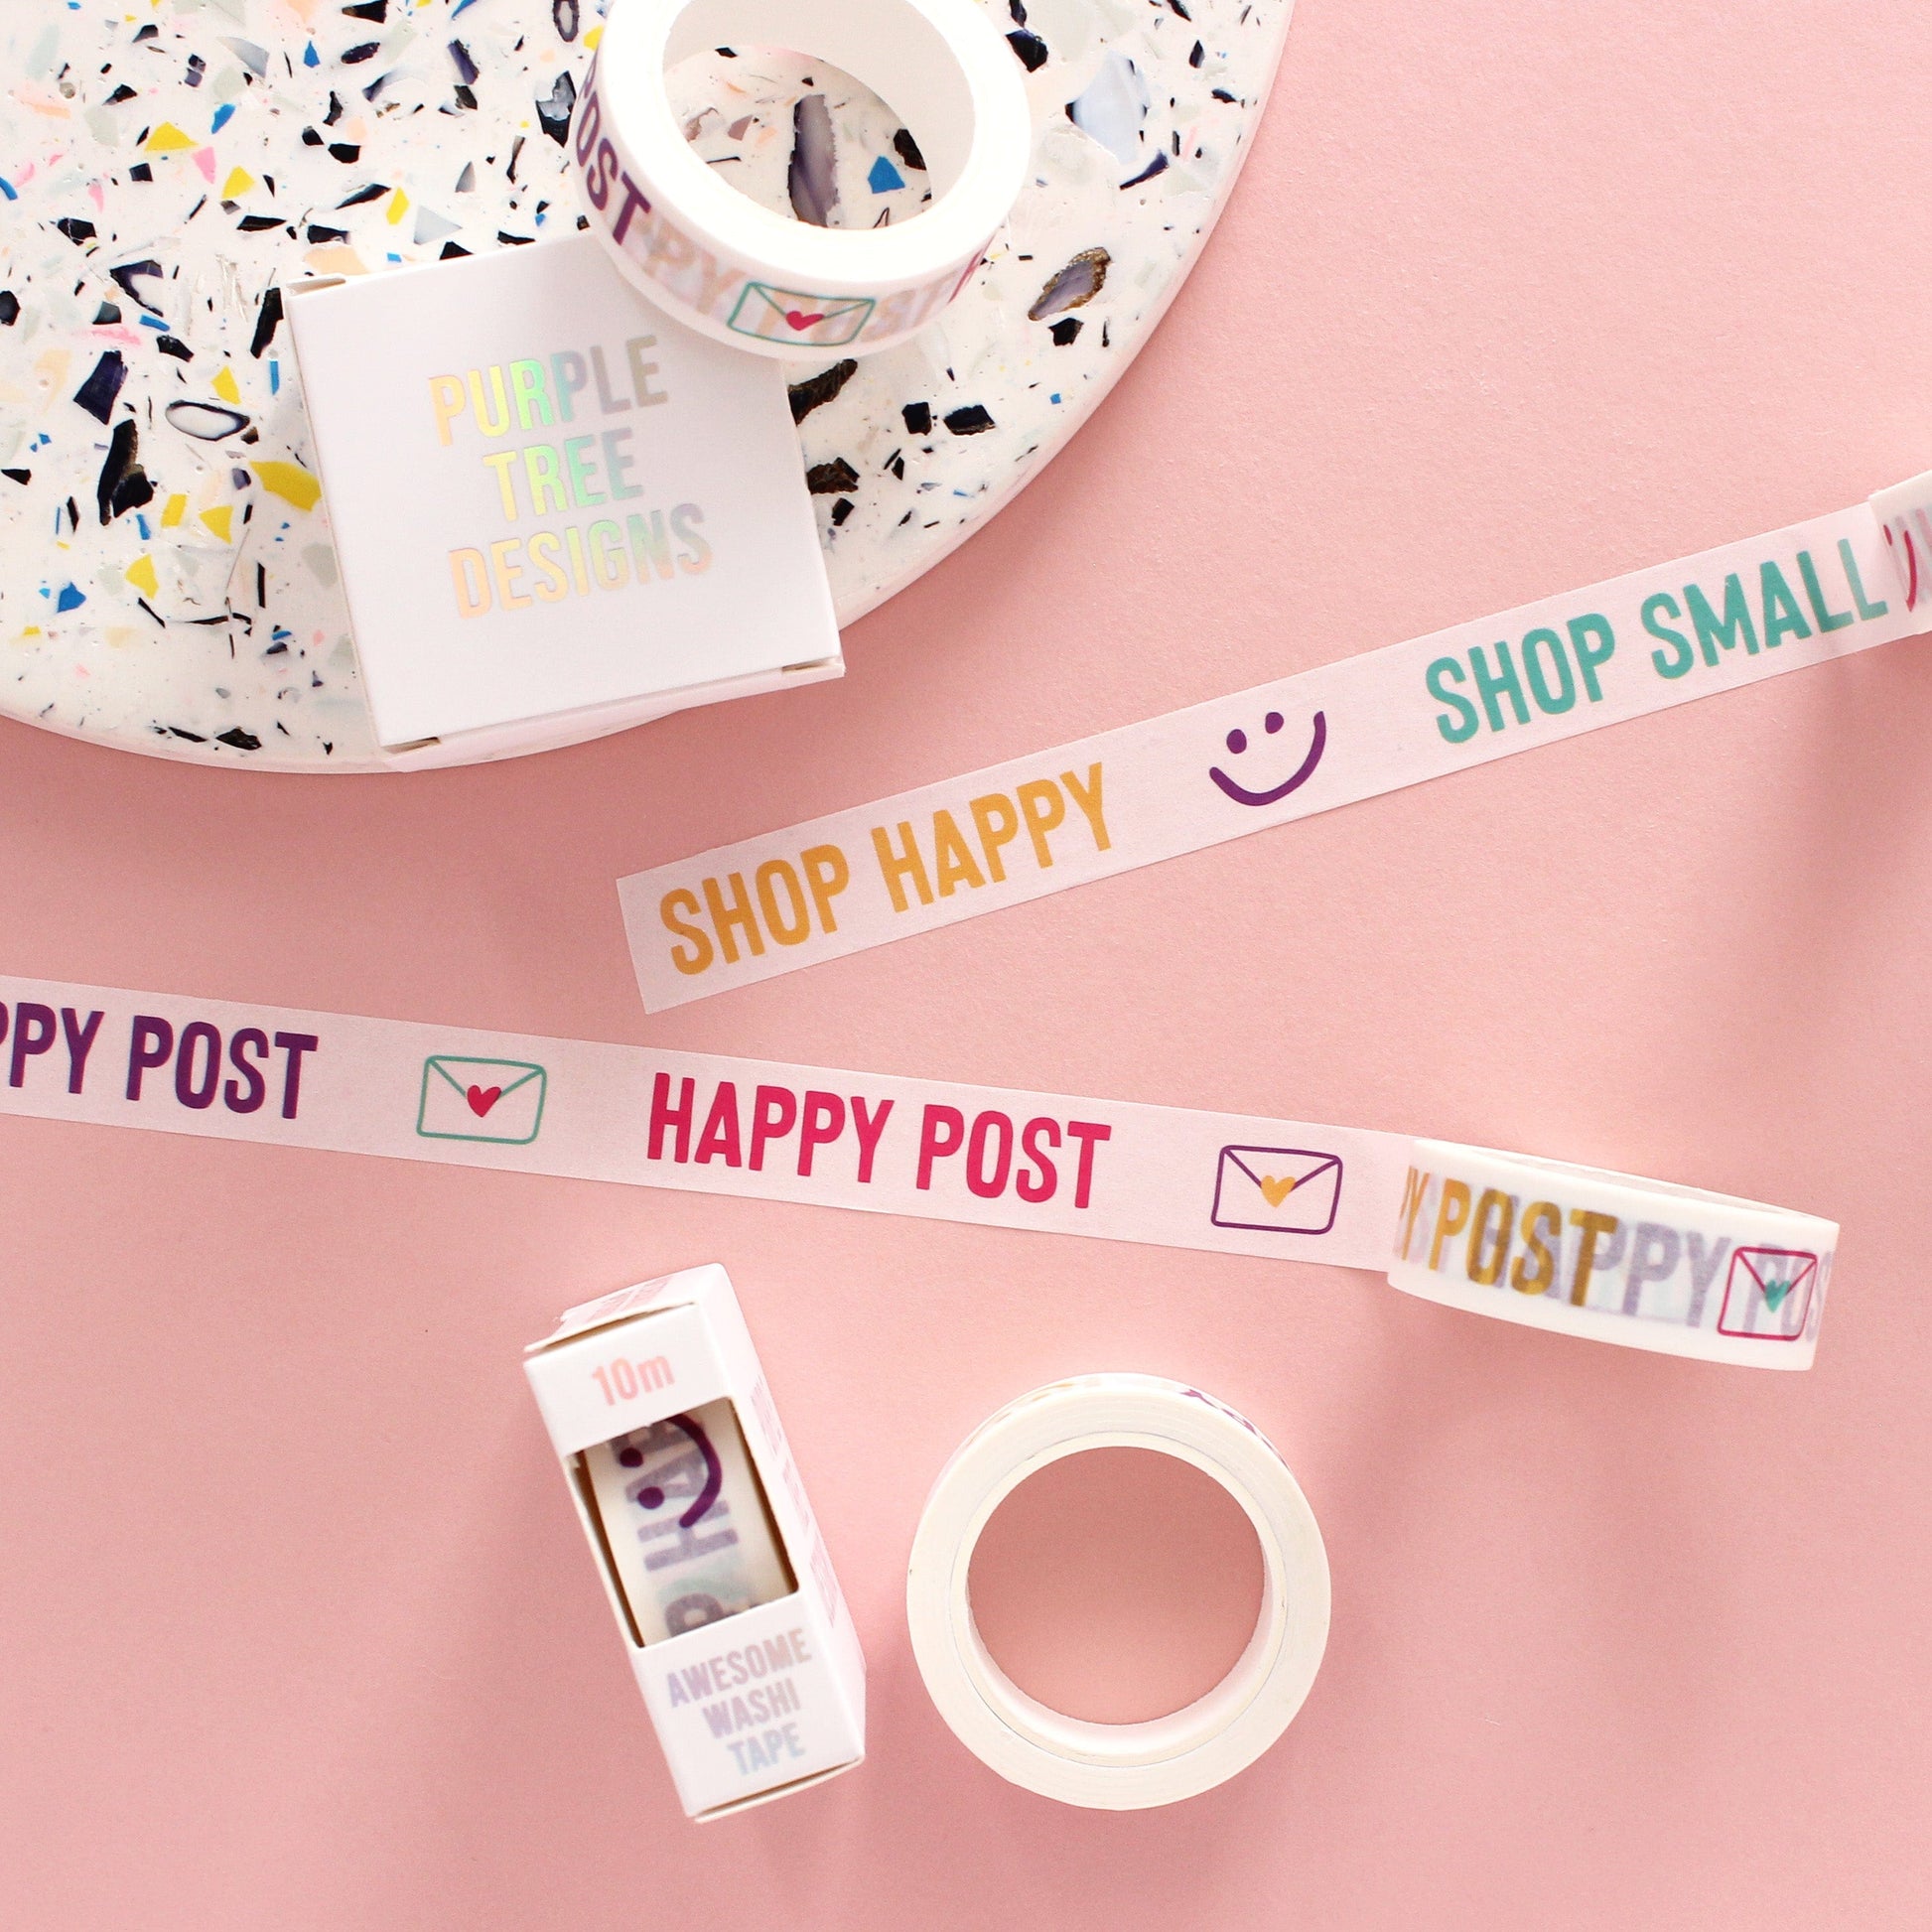 Set of 2 small business washi tapes from Purple Tree Designs